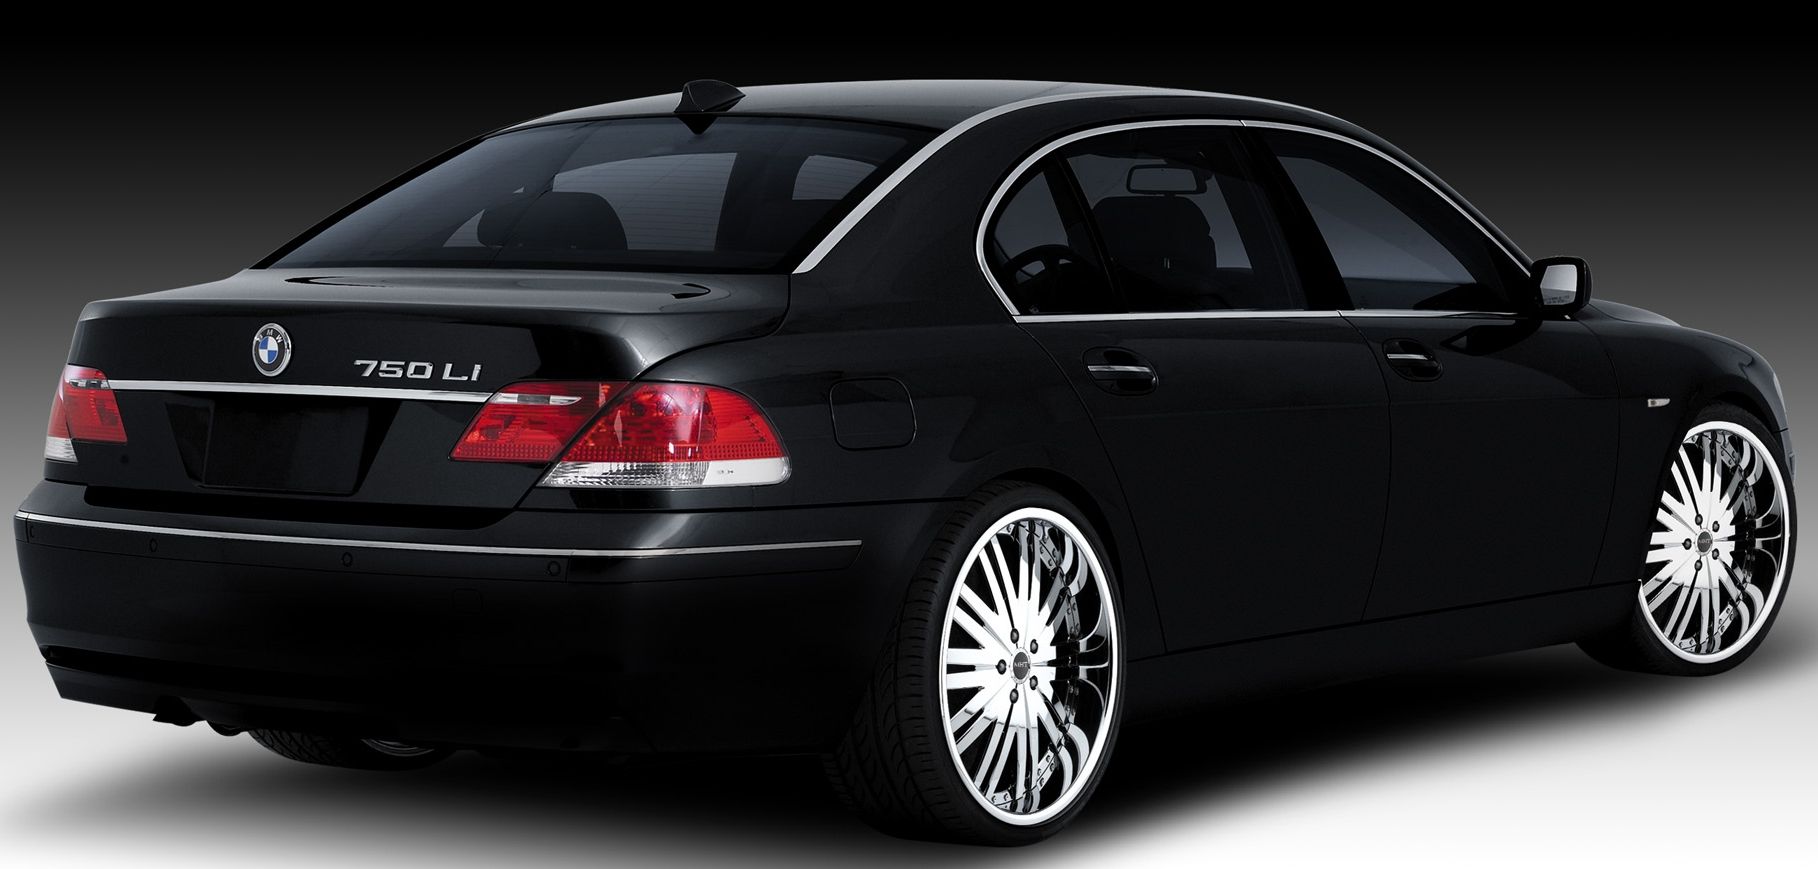 BMW 740i. View Download Wallpaper. 1818x869. Comments